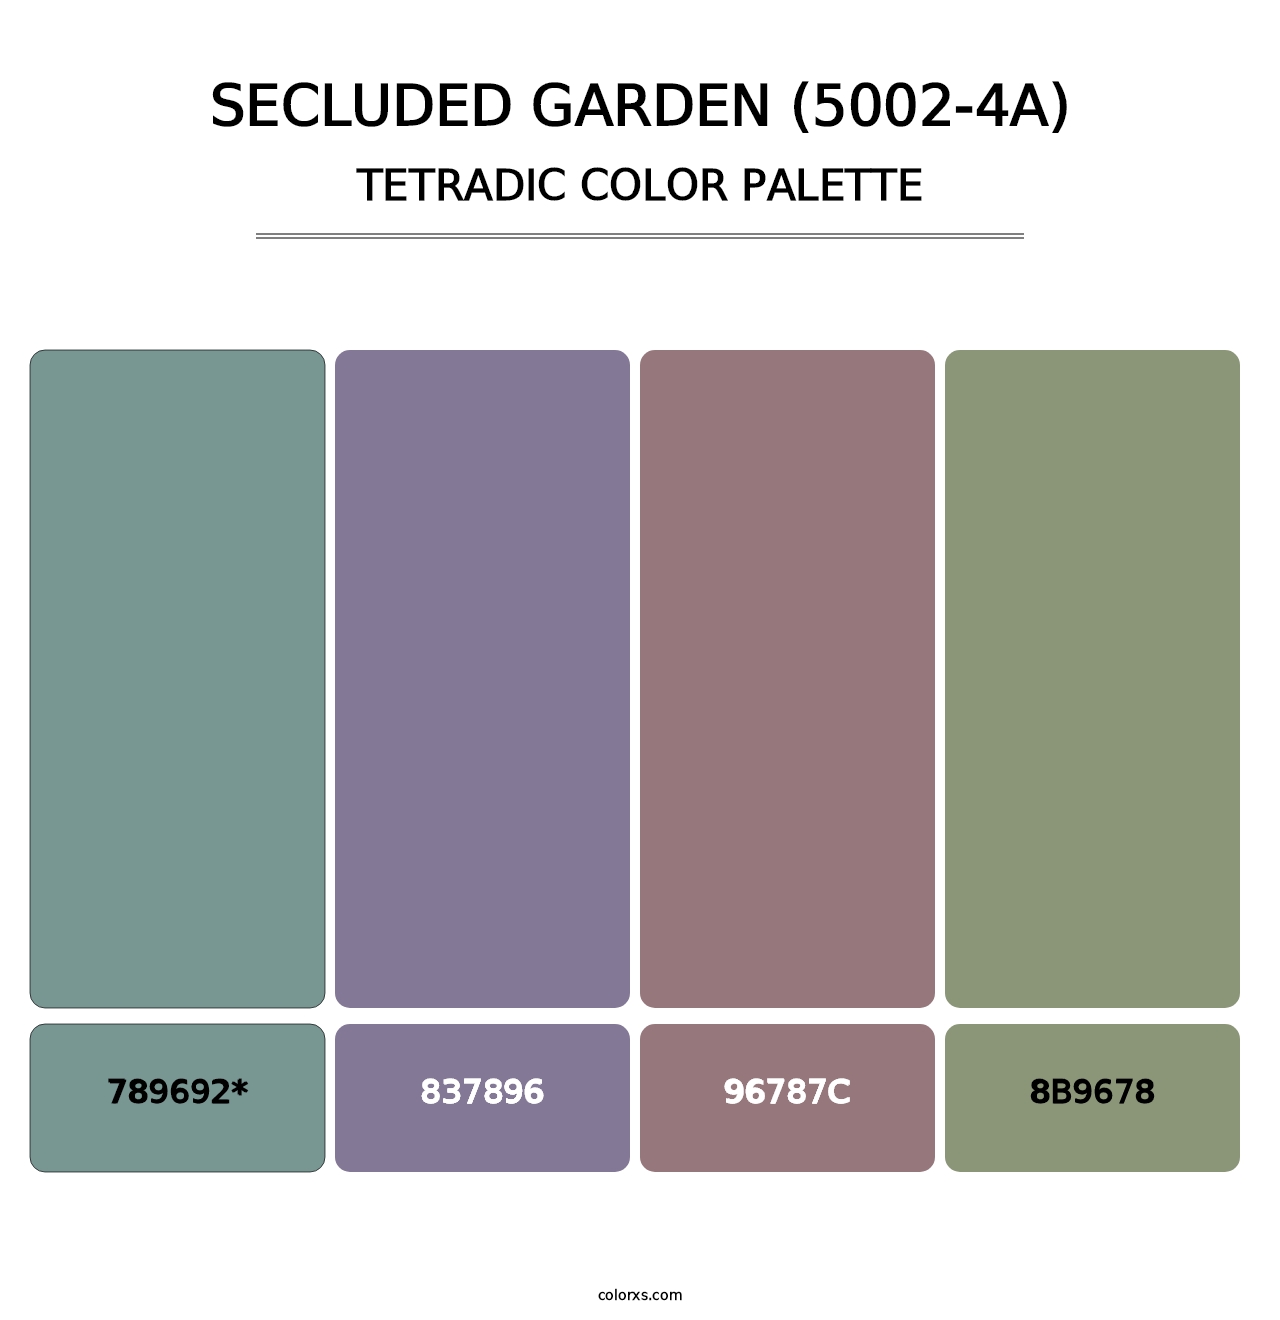 Secluded Garden (5002-4A) - Tetradic Color Palette